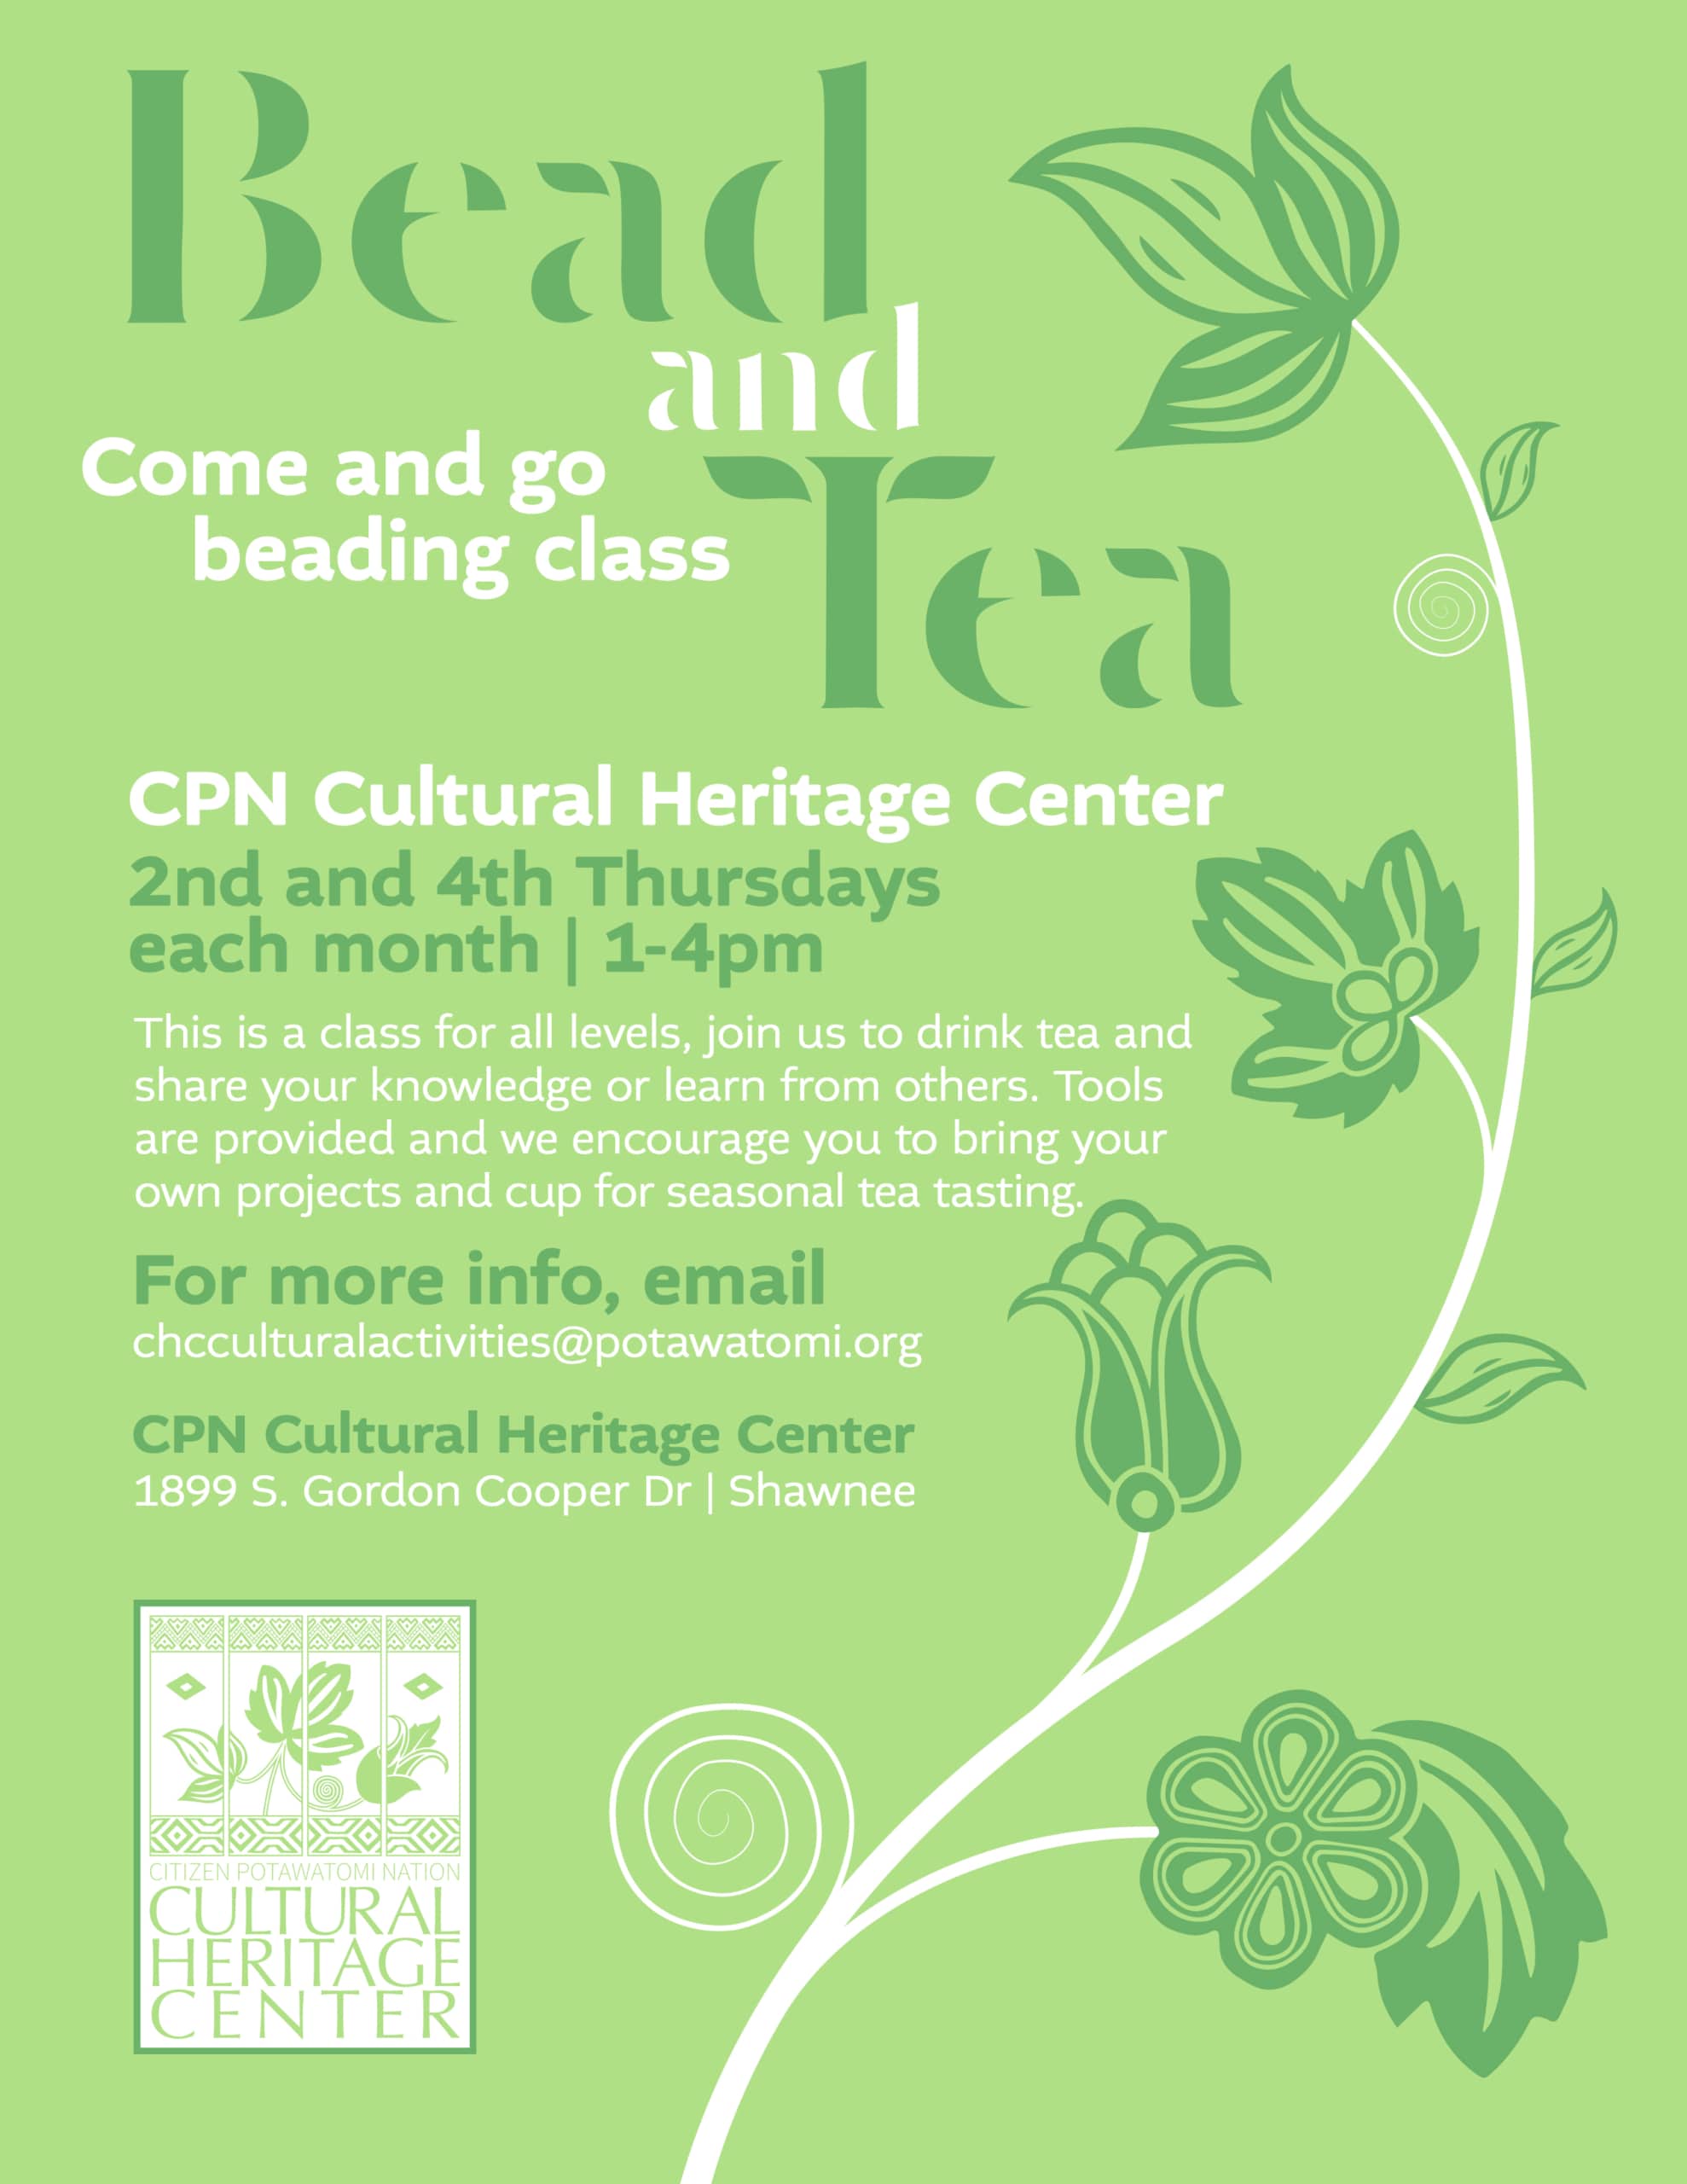 Tea green background with dark green and white letters and floral designs announcing a biweekly bead and tea class at the CPN Cultural Heritage Center.